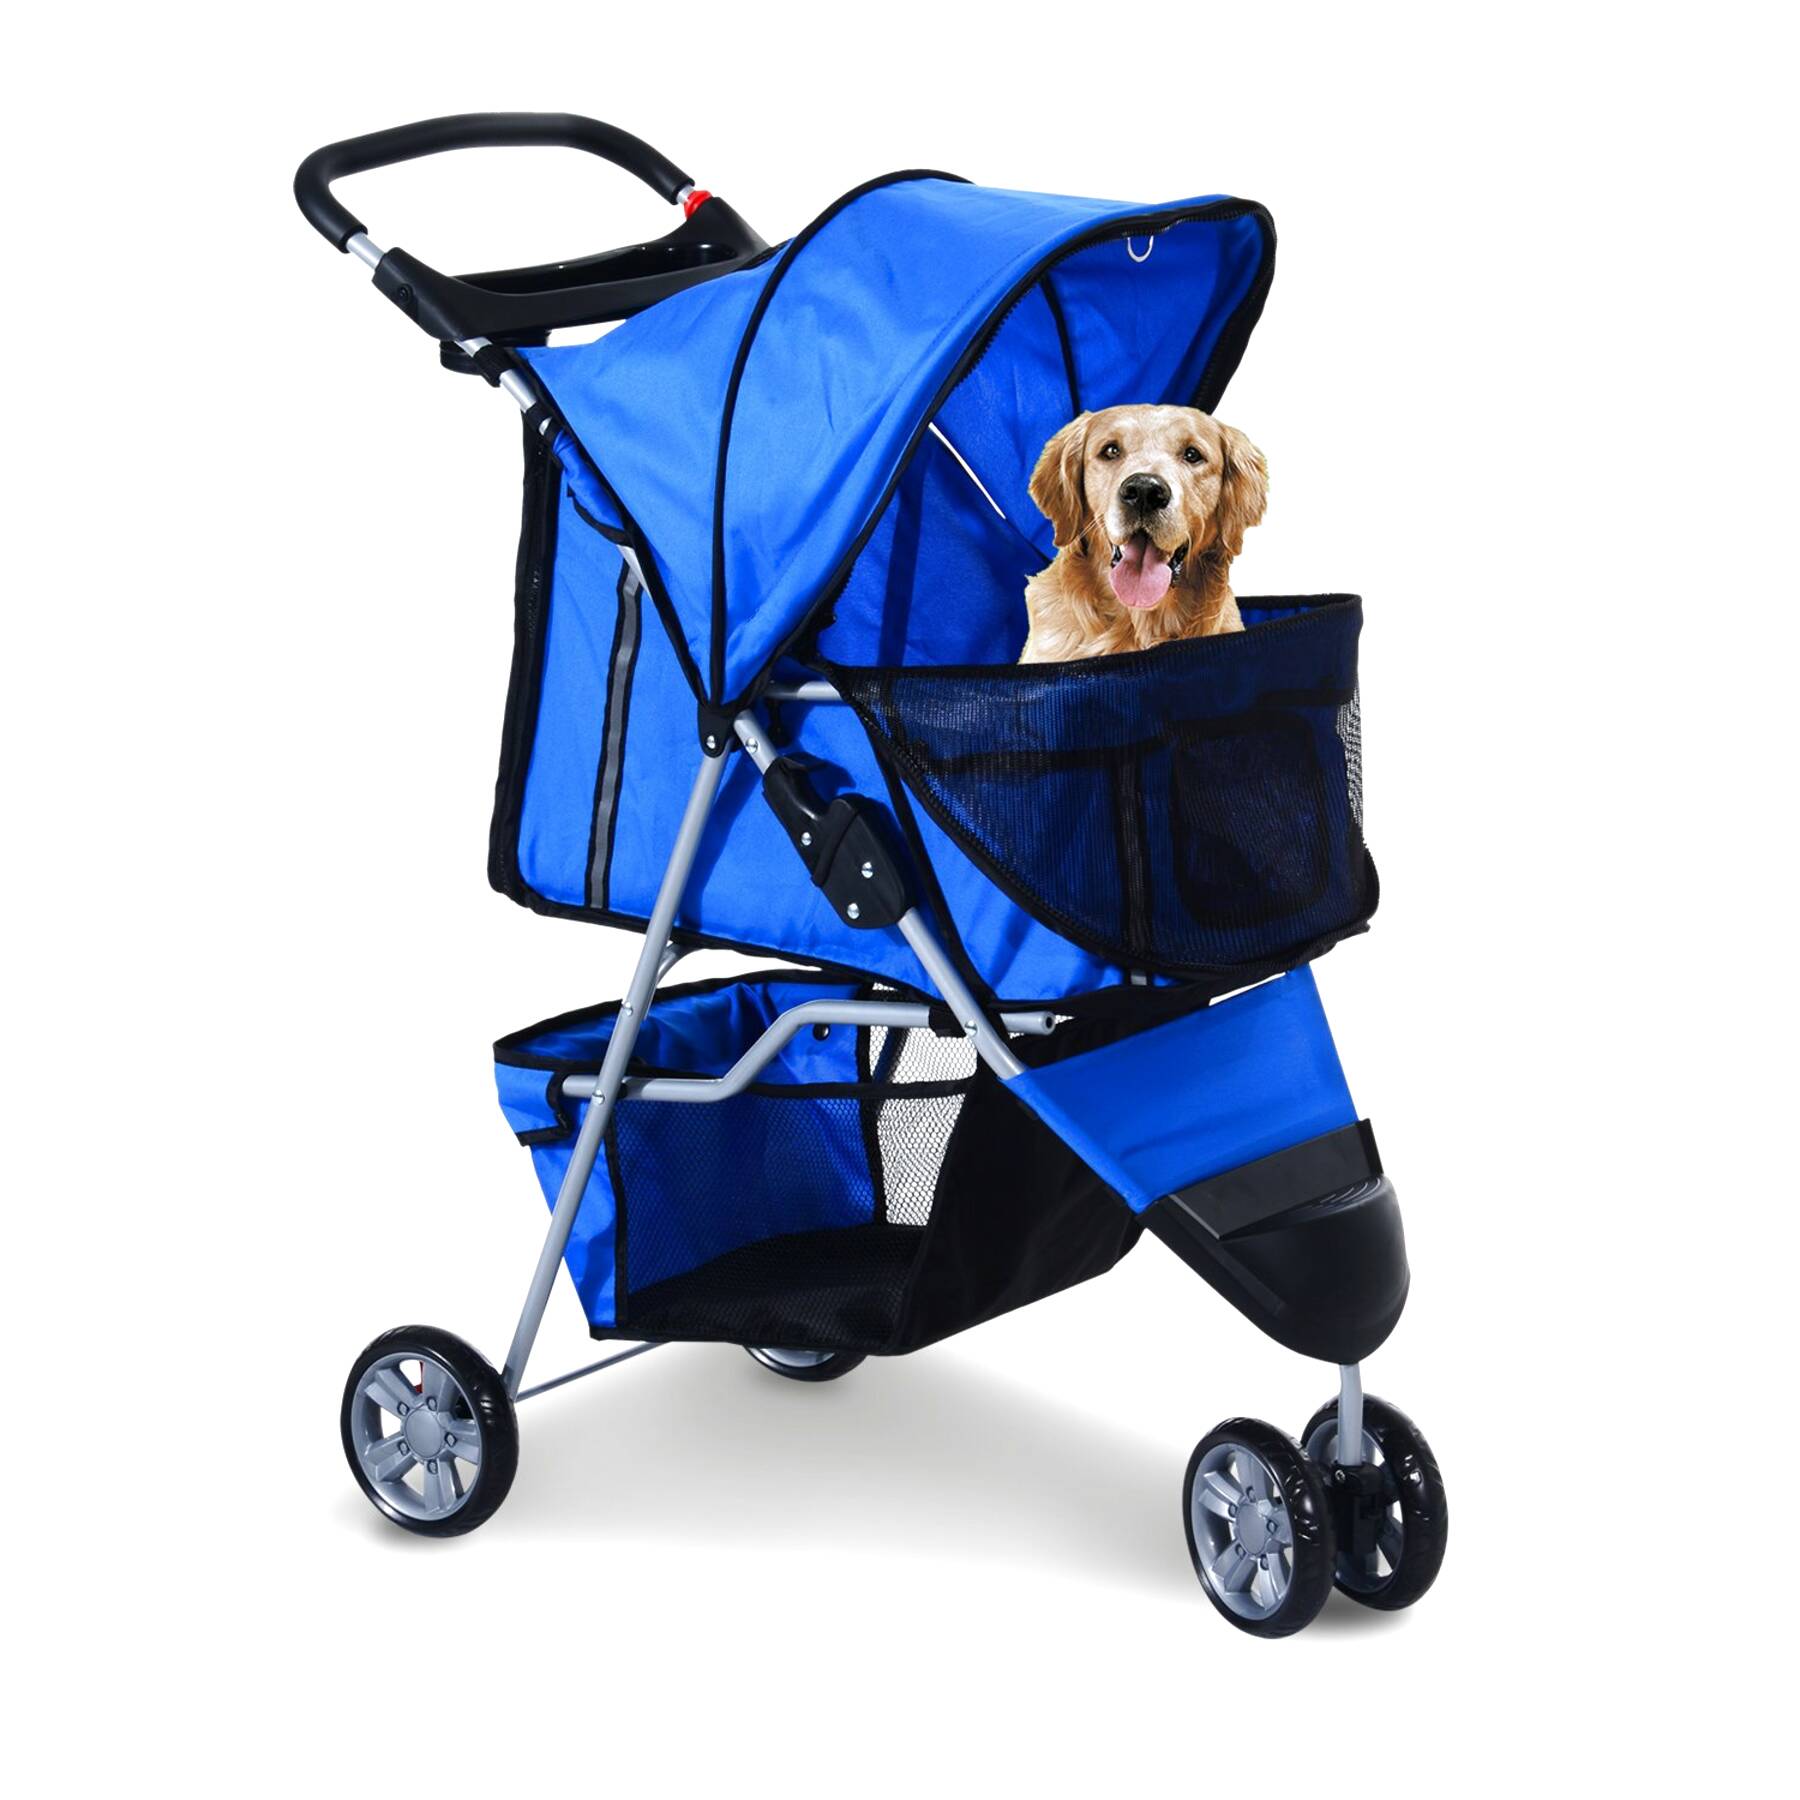 Dog Pushchair for sale in UK | 81 used Dog Pushchairs